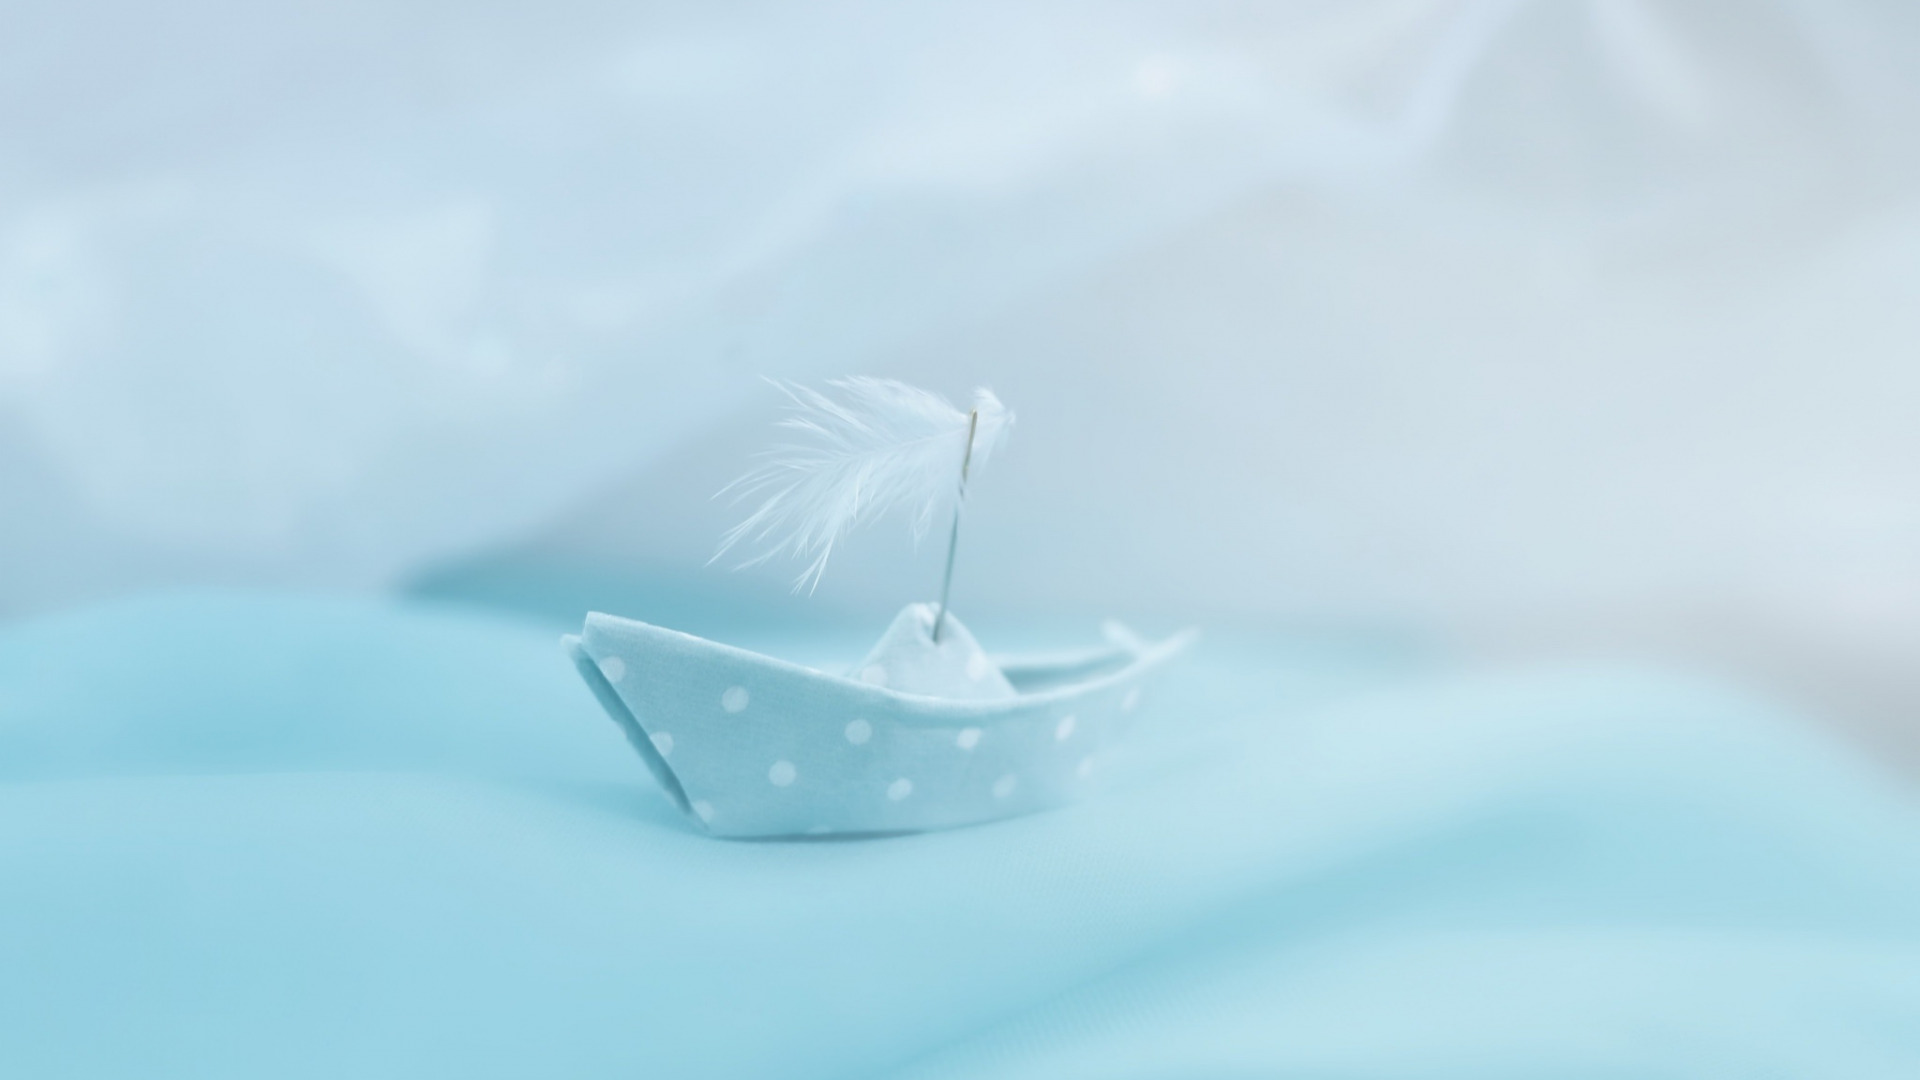 Boat Warm Colors Paper Boats Feathers Minimalism Dots 1920x1080